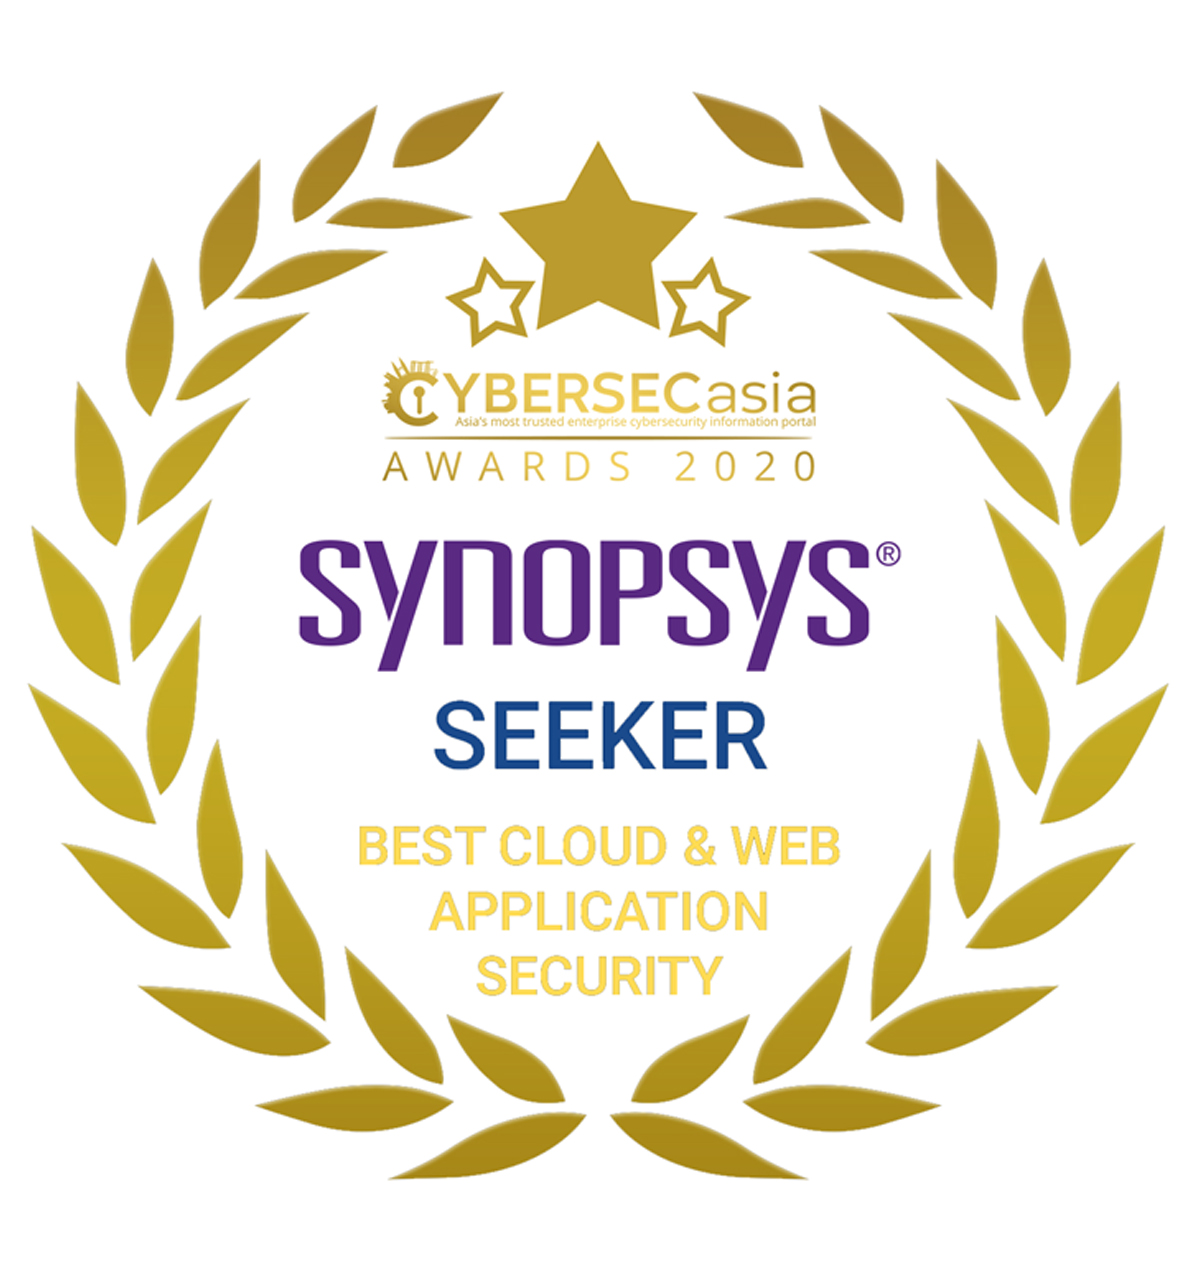 CybersecAsia Awards 2020 badge for Synopsys Seeker IAST software, best in cloud & web application security